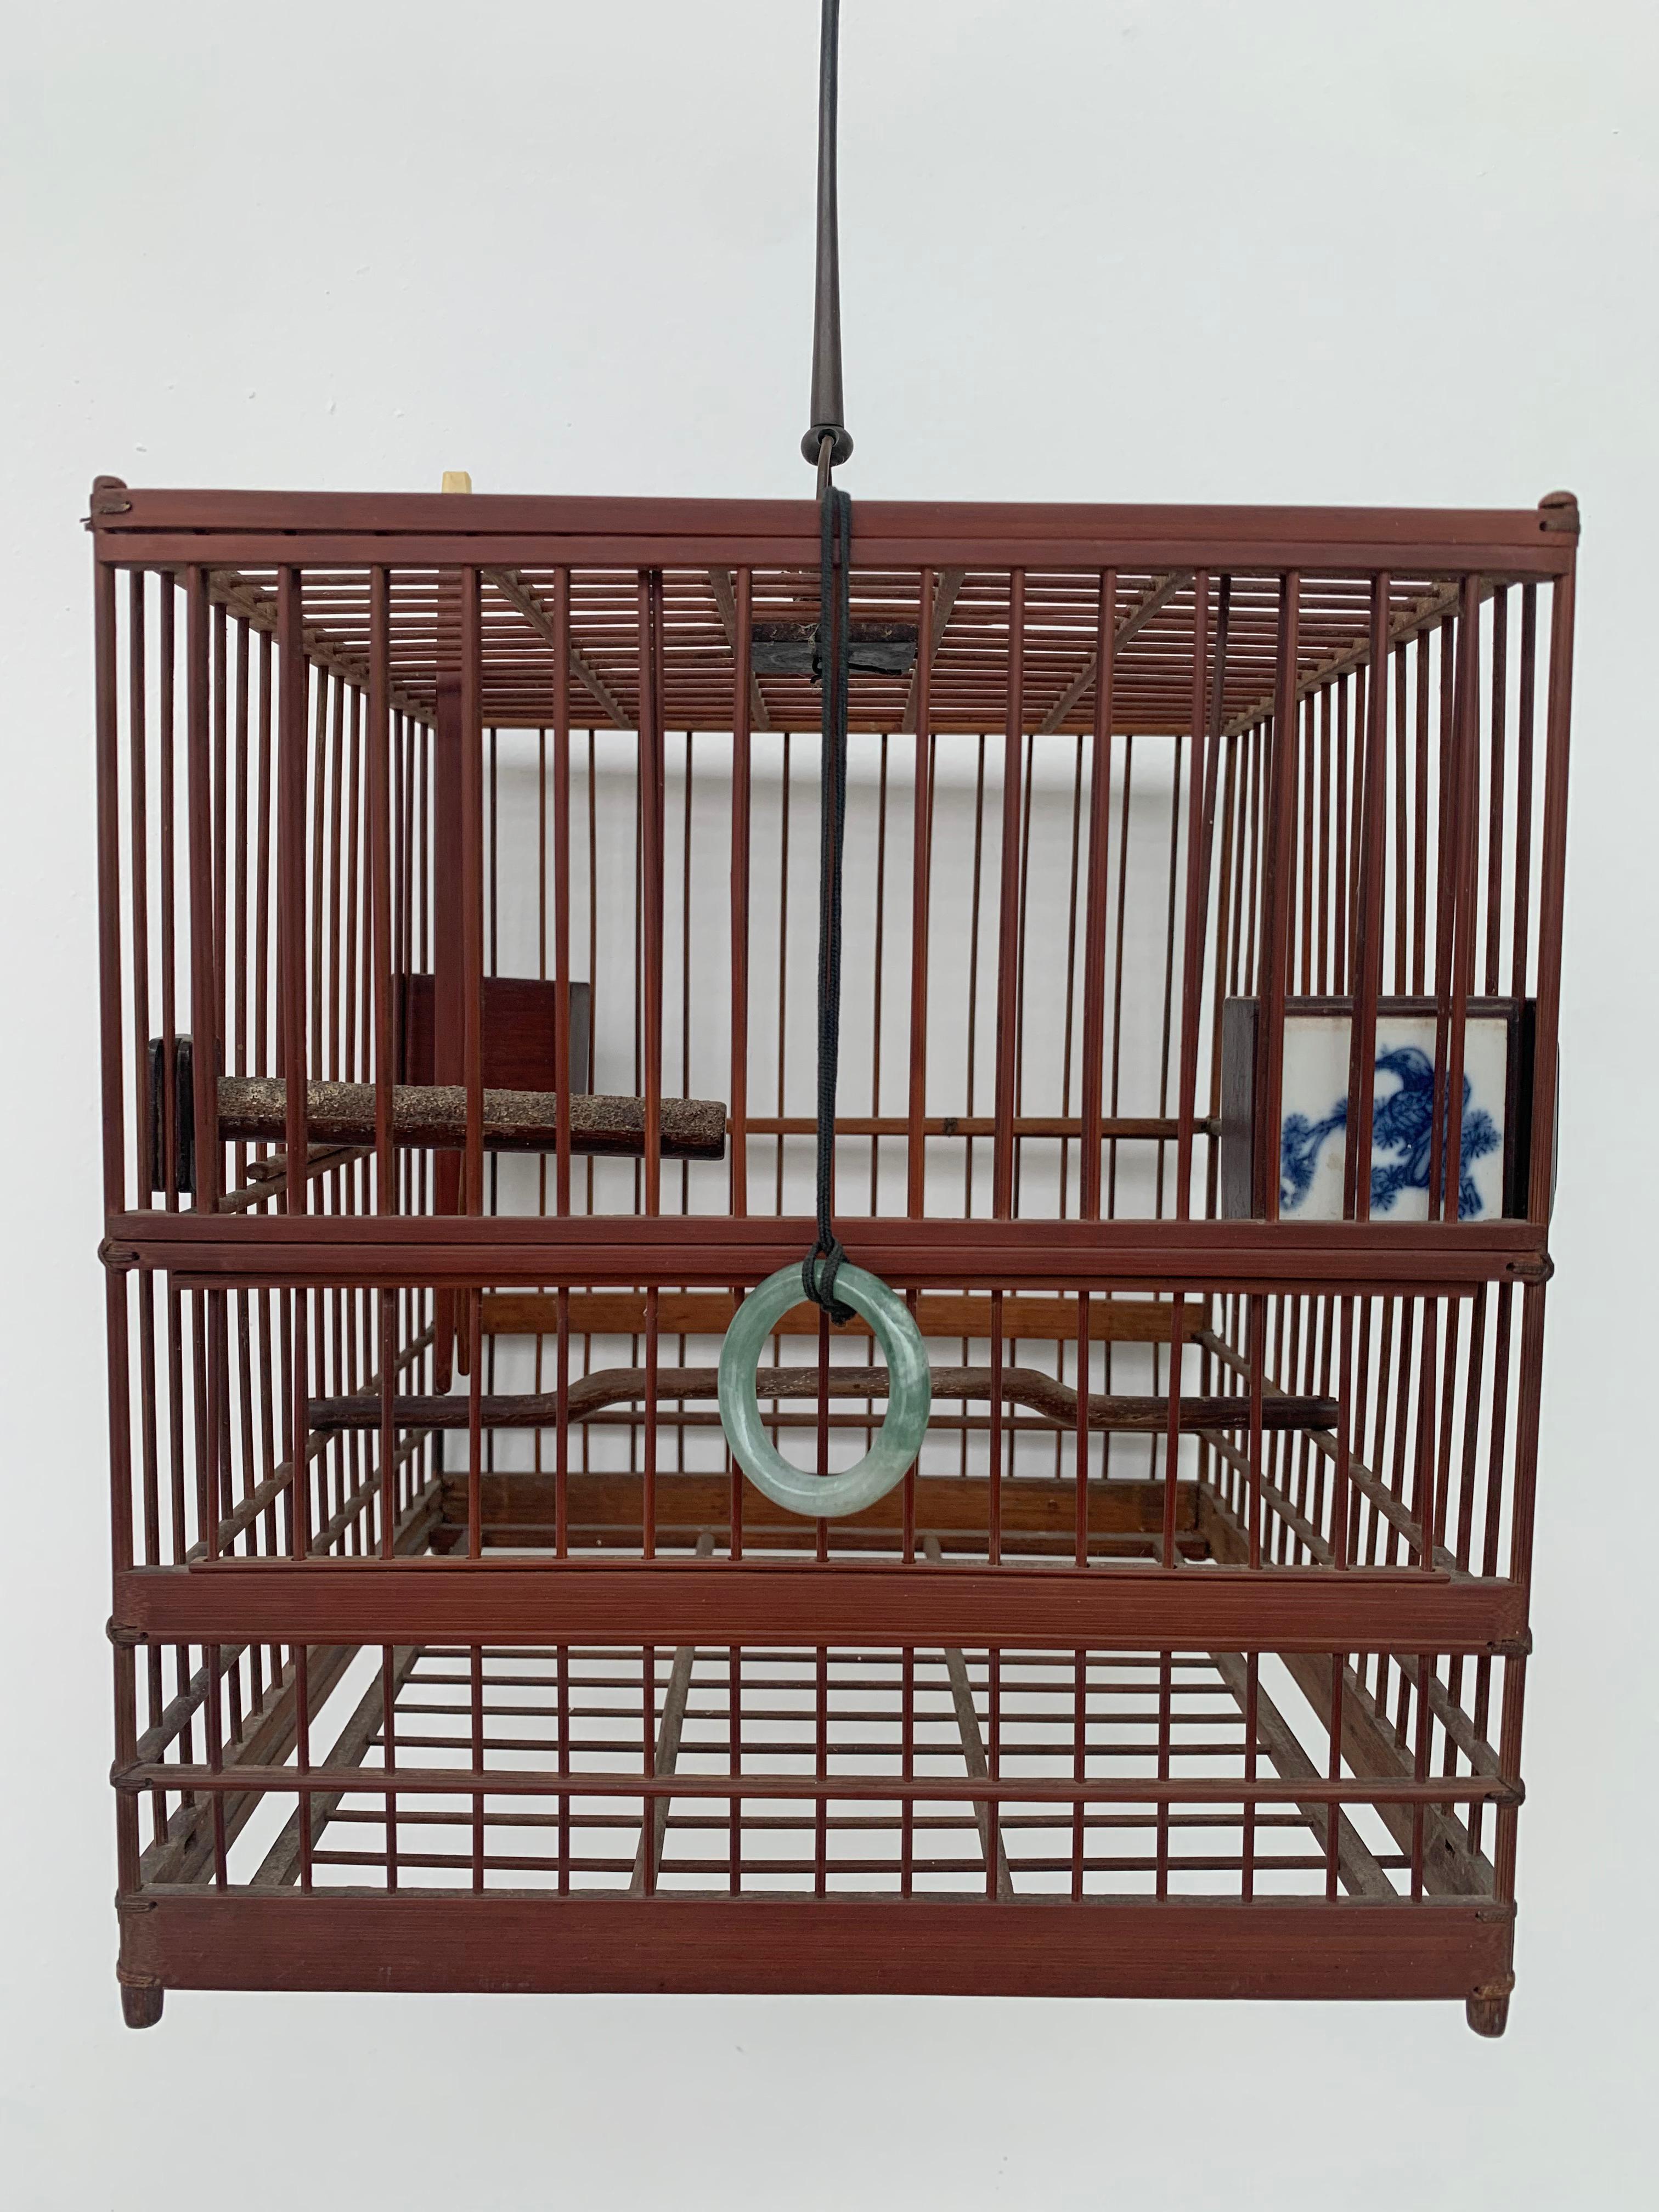 A bamboo birdcage adopting a square shape with a handle for hanging. The cage features 2 porcelain feeding bowls as well as two lifting doors on opposing sides. Overall this cage features beautiful craftsmanship. 

Dimensions: Height 24cm x Width